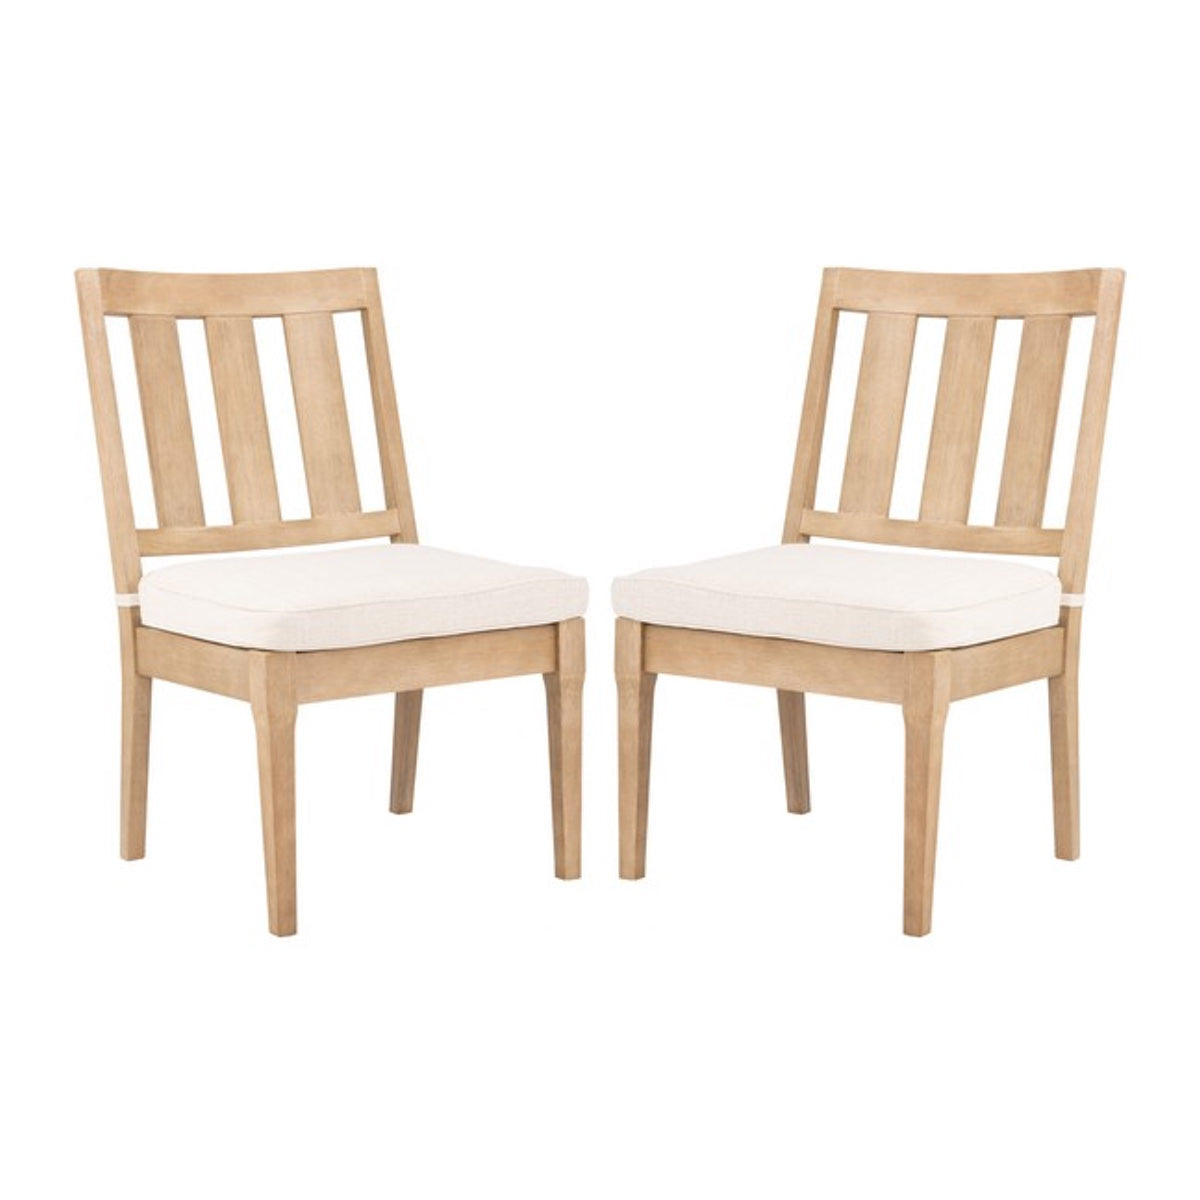 Delray Outdoor Dining Chair - Set of 2